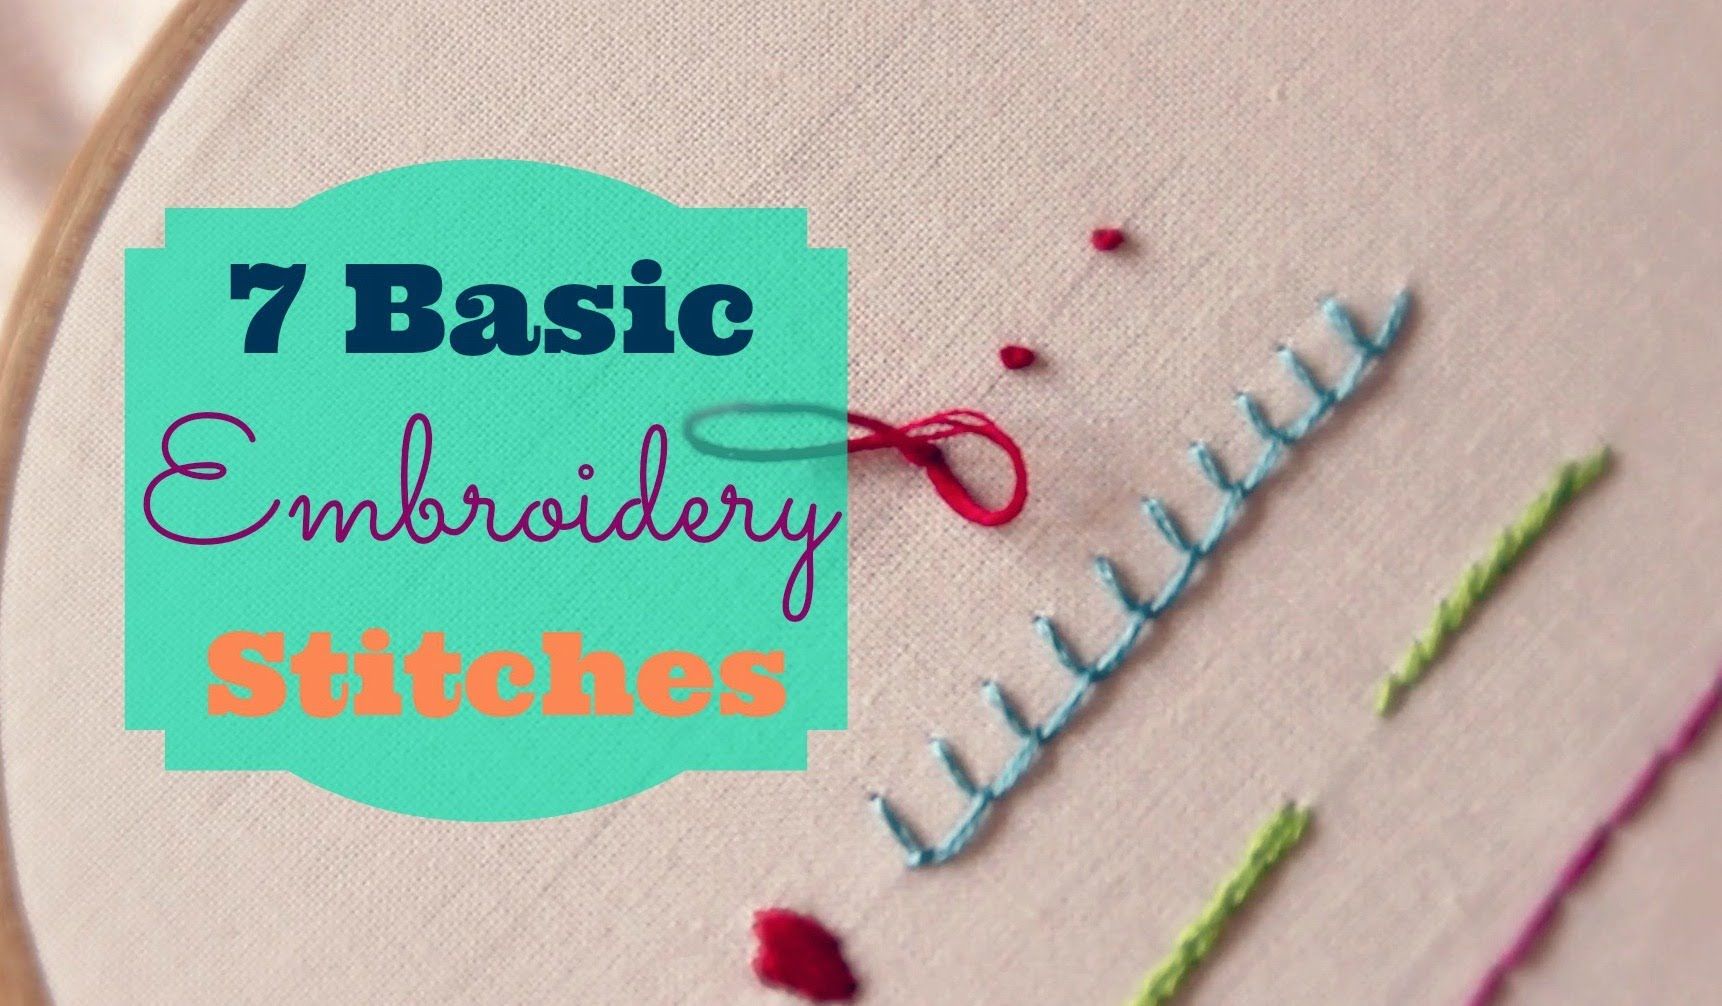 7 Basic Embroidery Stitches -   Wonderful pictorial reference to basic and embroidery stitches.